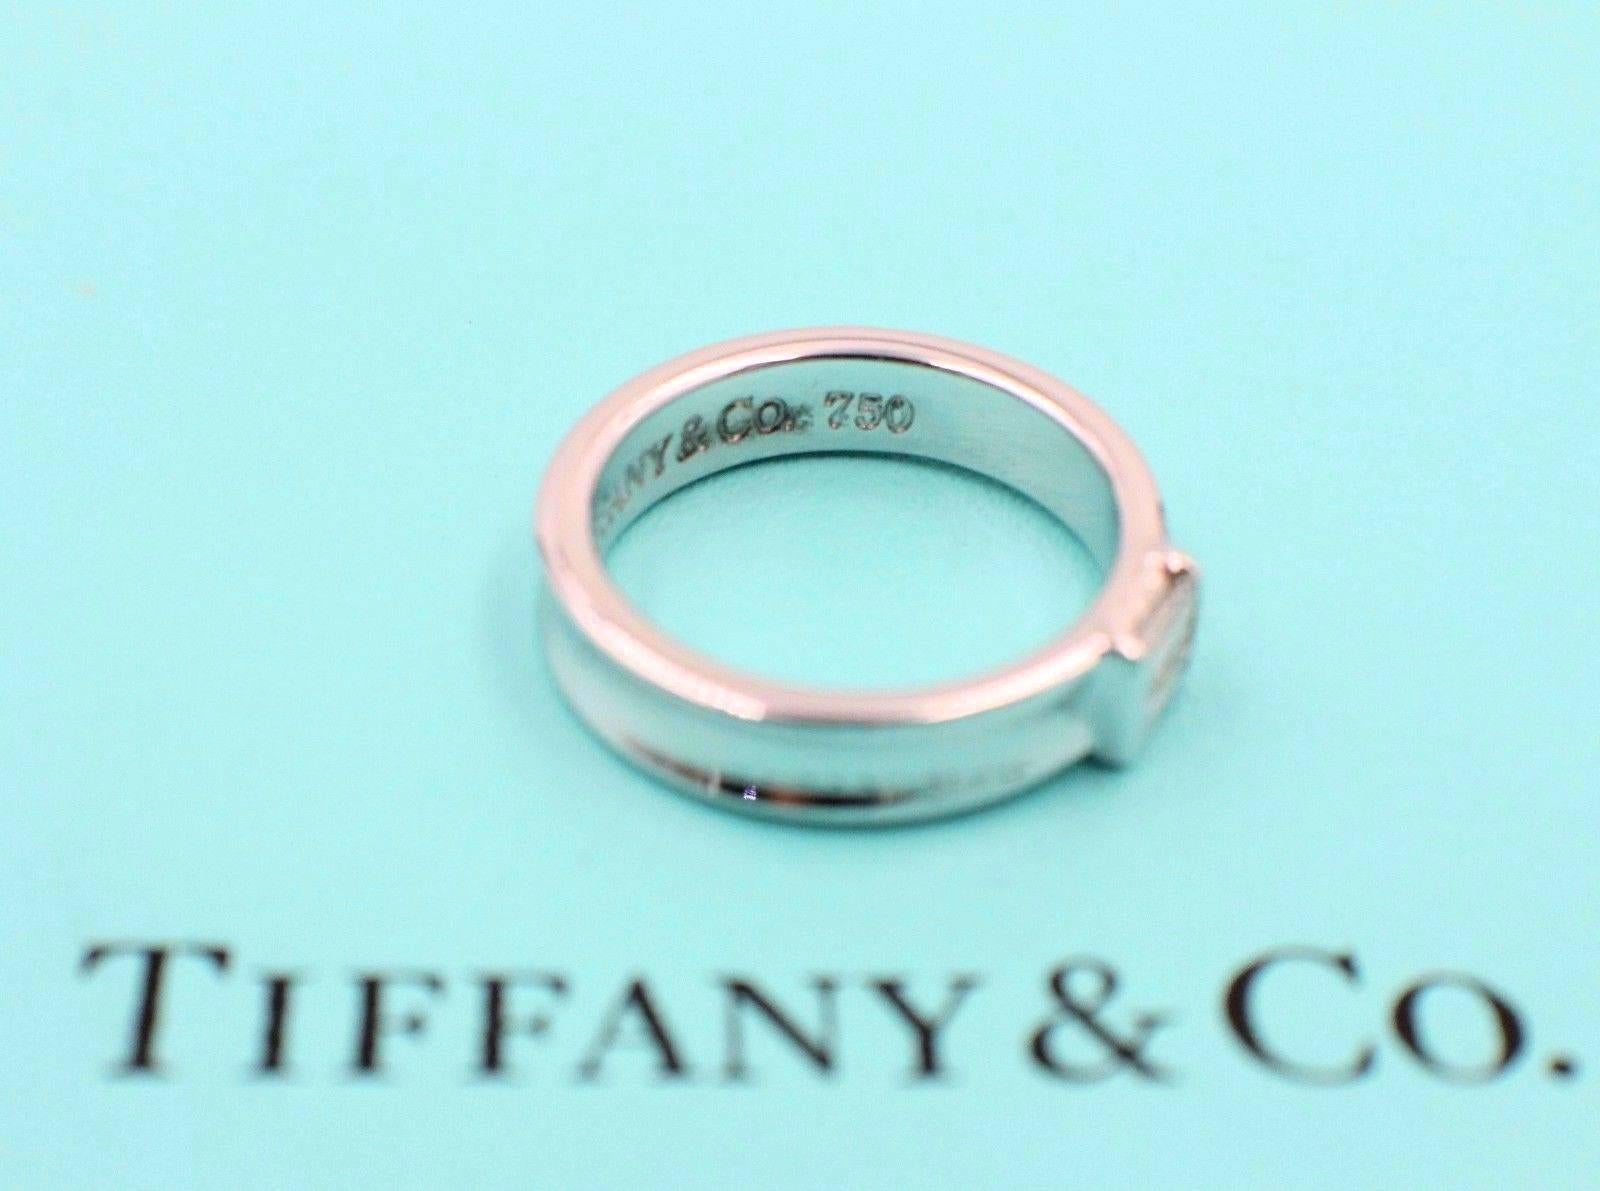 Tiffany & Co. Baguette Diamond and 18 Karat Gold Stackable Wedding Band Ring For Sale 1